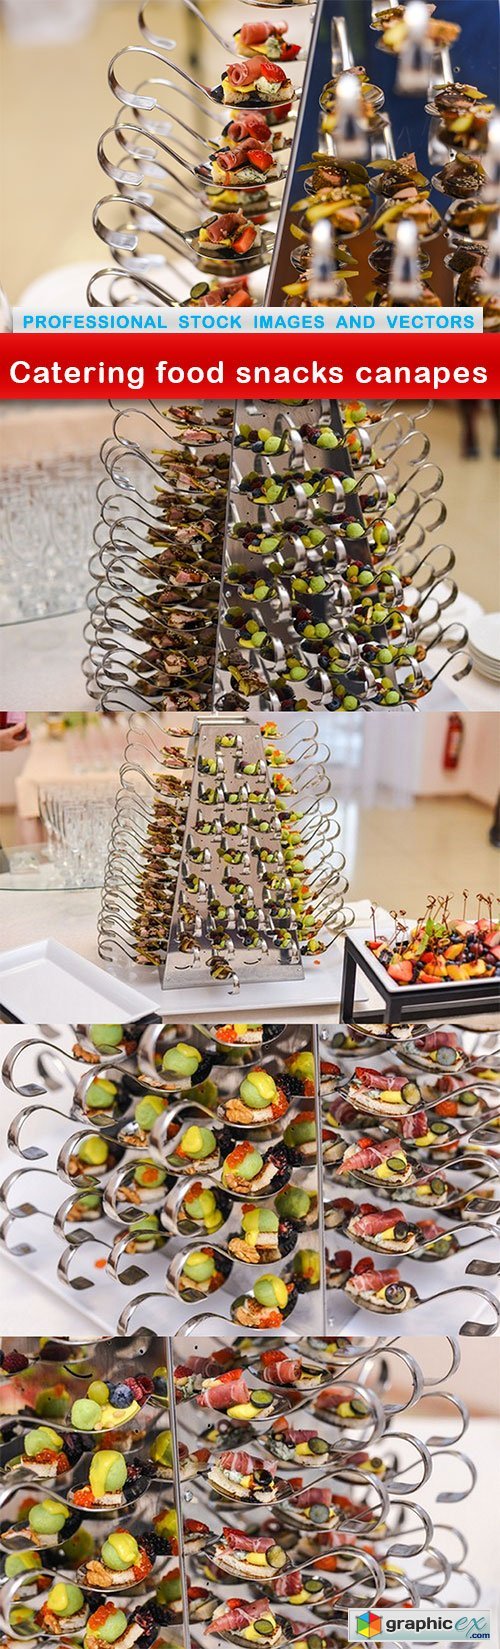 Catering food snacks canapes - 5 UHQ JPEG